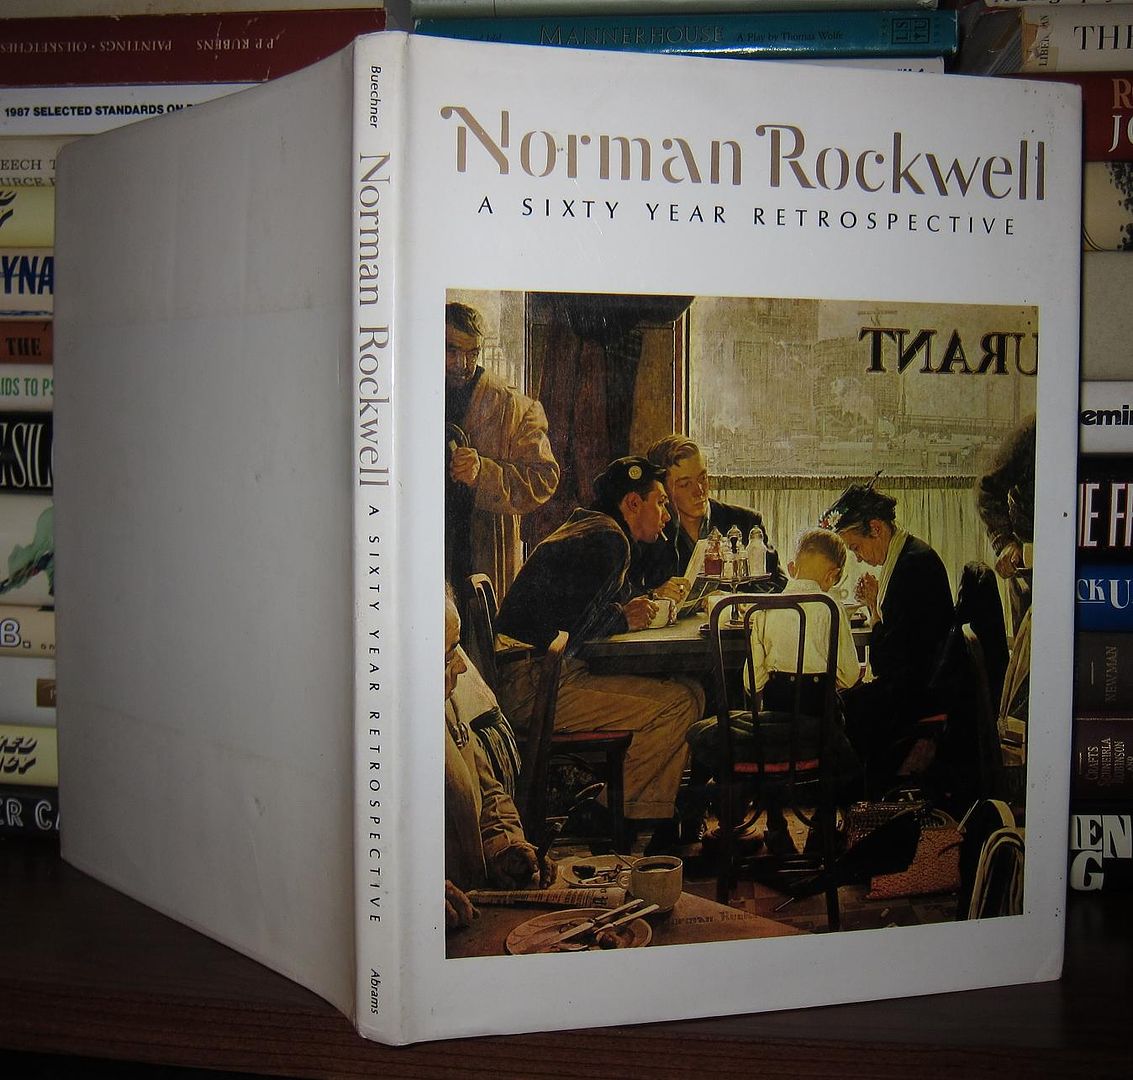 NORMAN ROCKWELL & THOMAS S. BUECHNER - Norman Rockwell a Sixty Year Retrospective